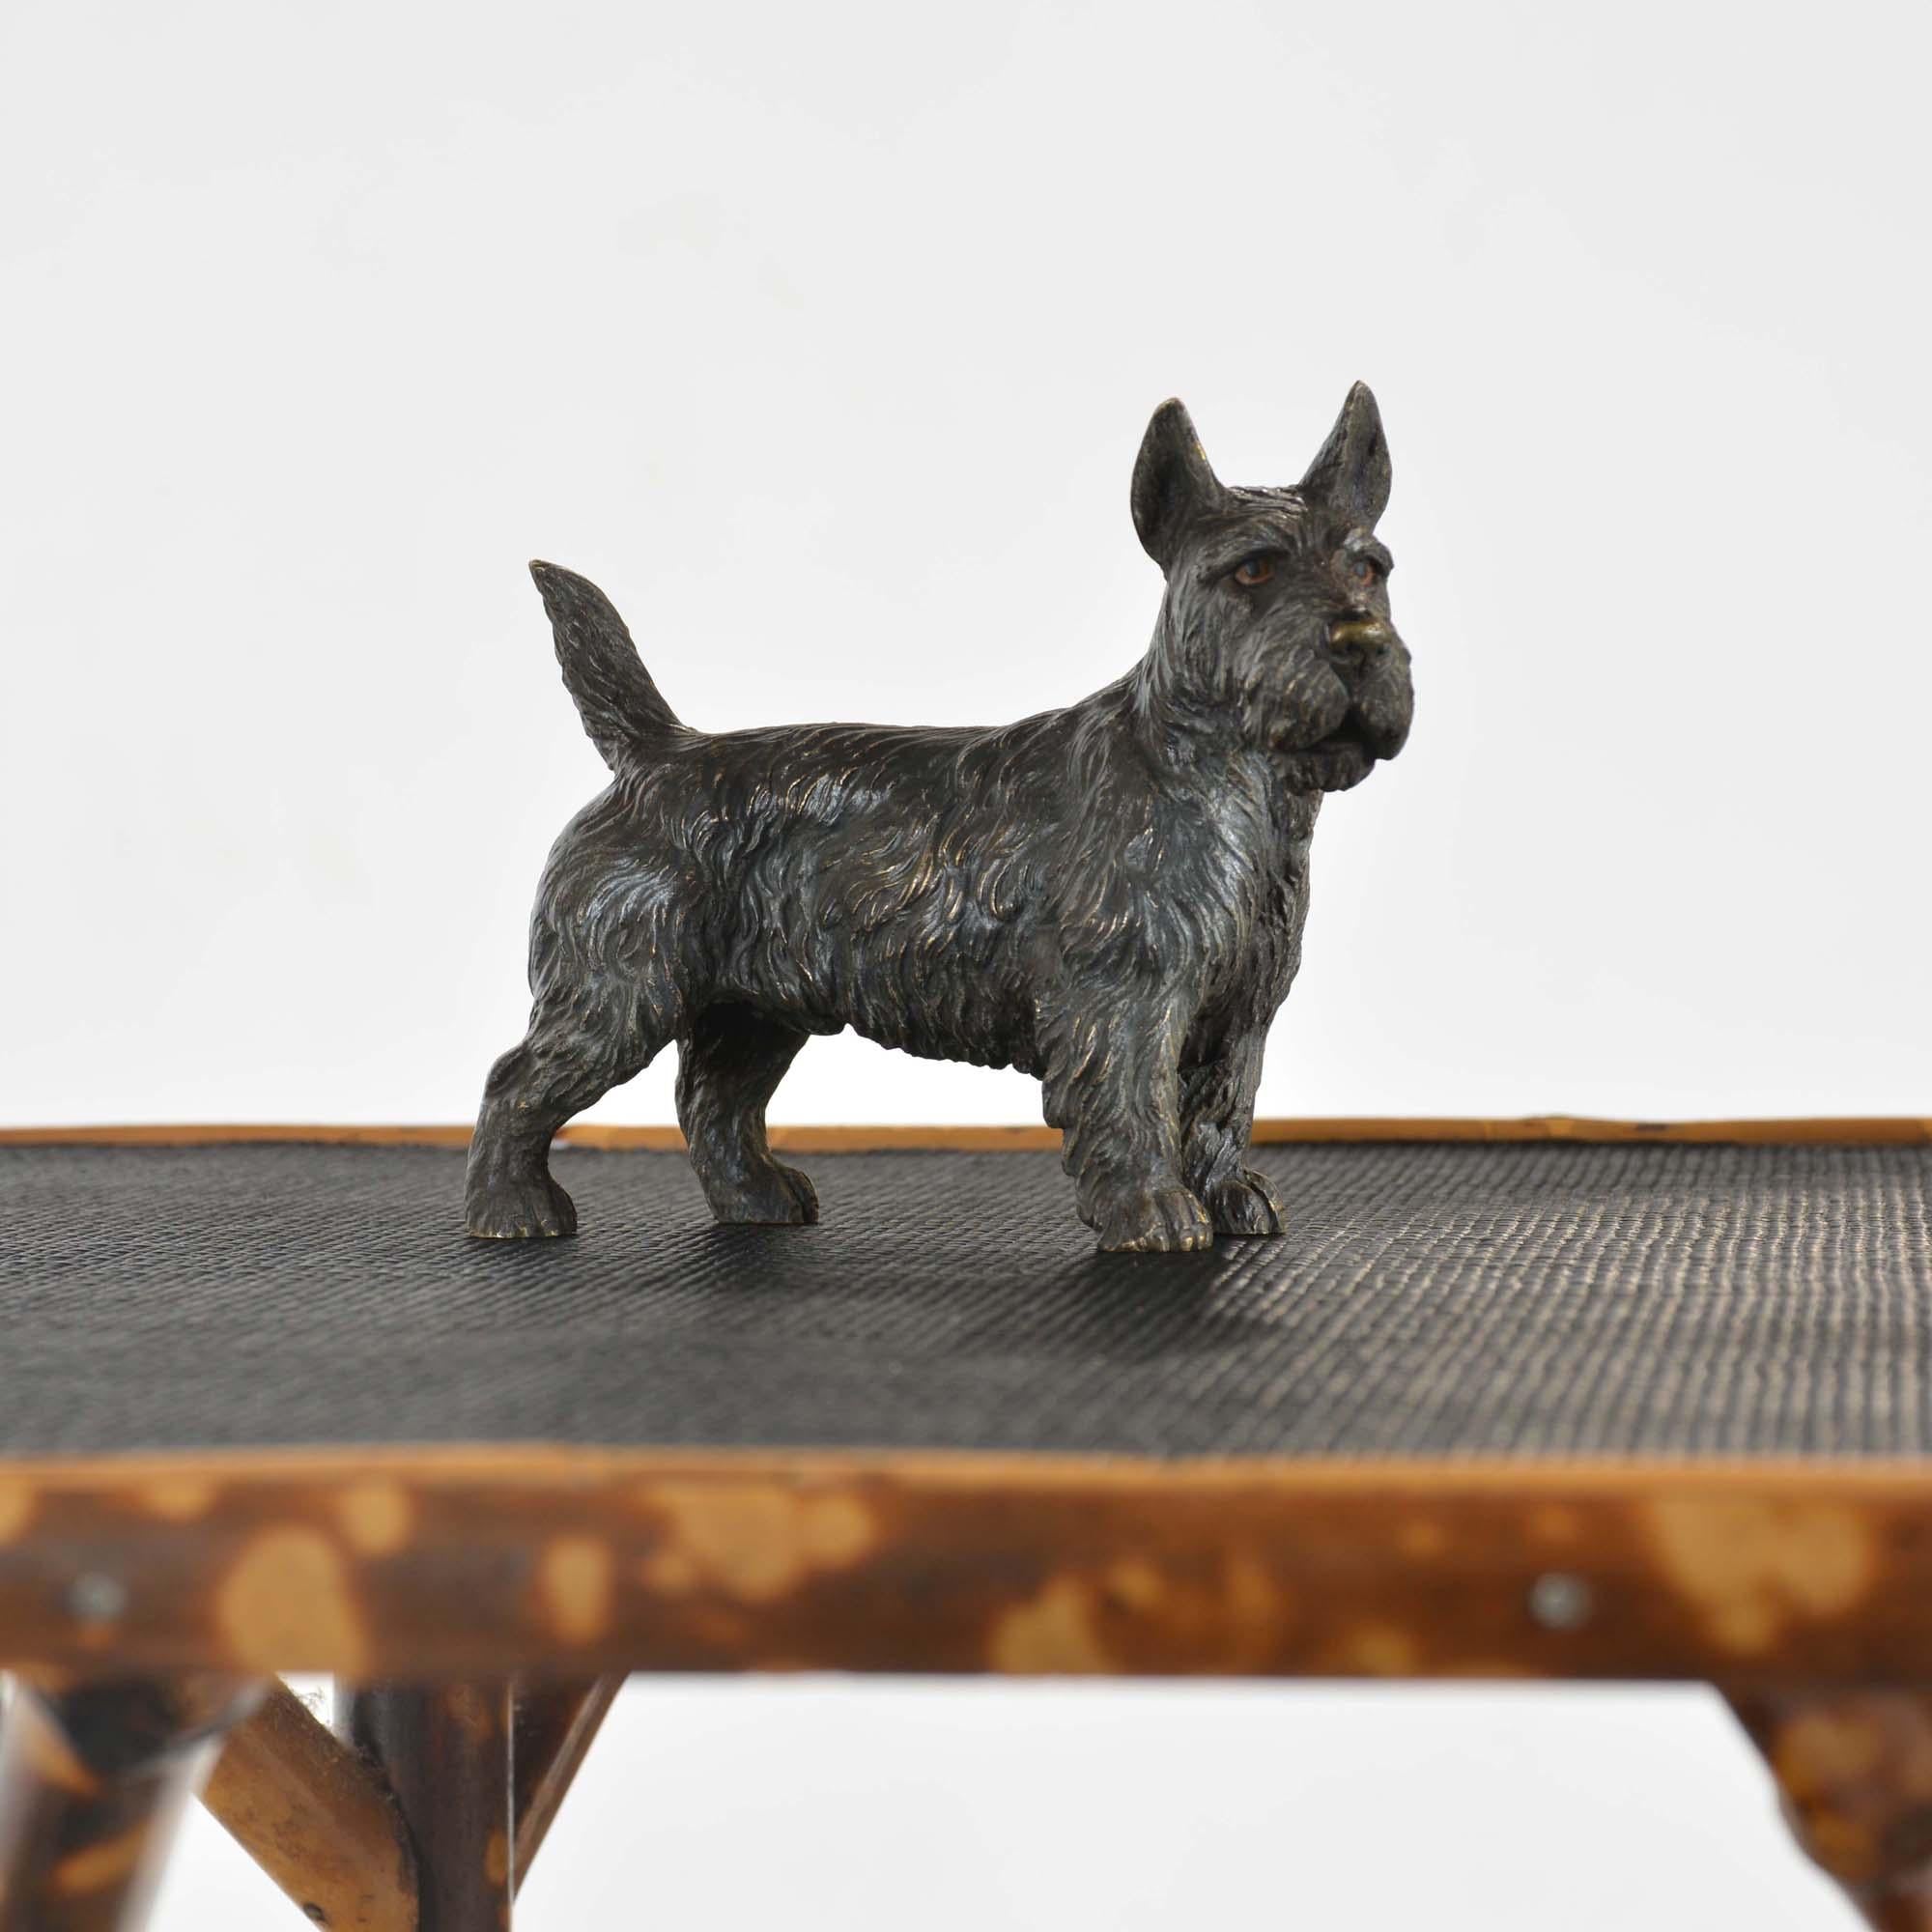 Austrian cold painted bronze of a Scottish Terrier, or 'Scottie Dog' For Sale 6